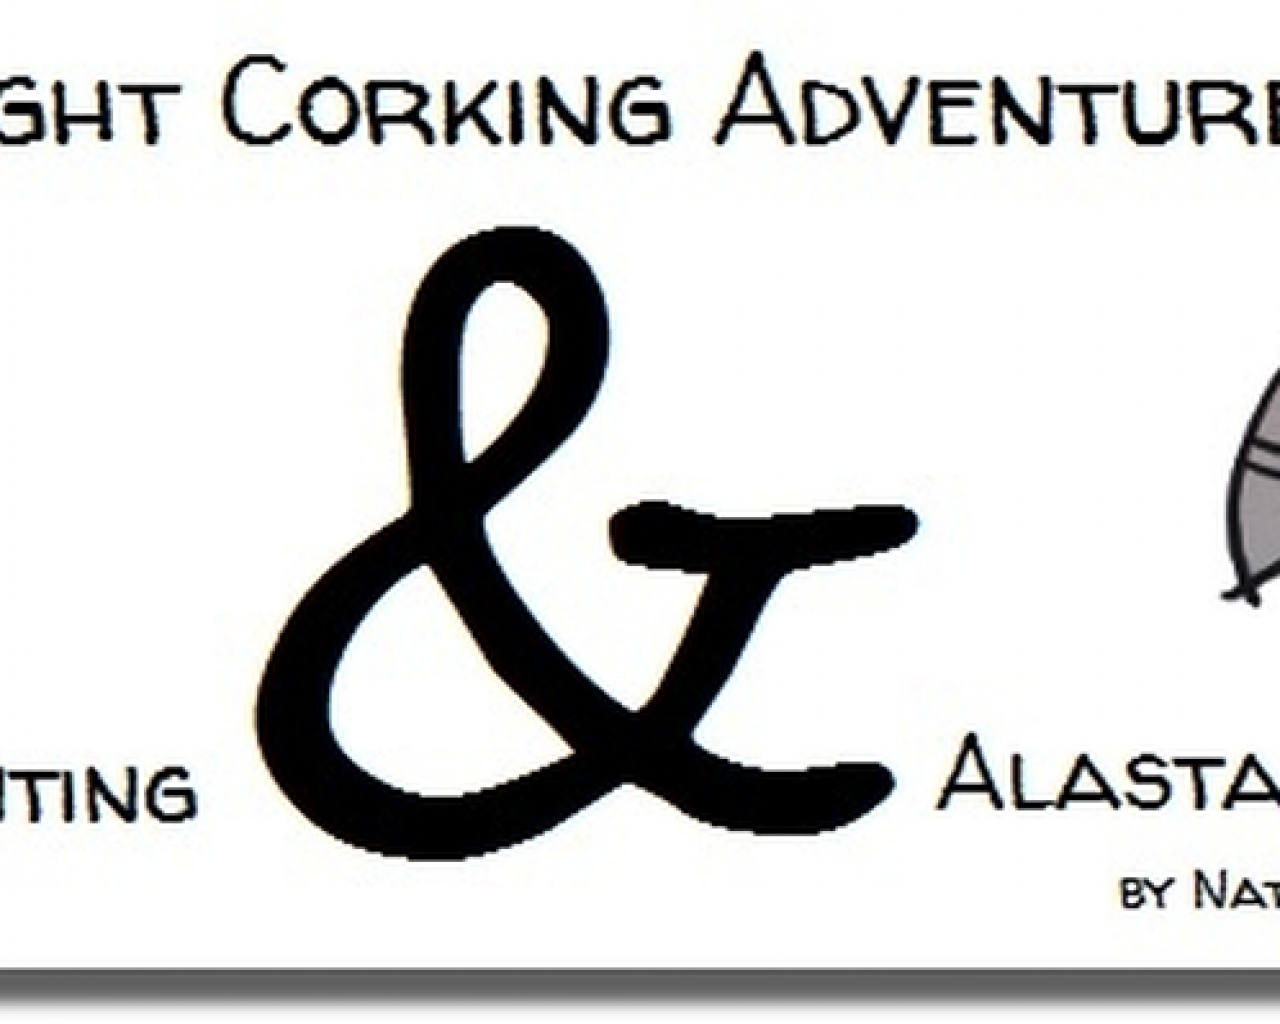 Poster Image for The Right Corking Adventures of Cecil Larkbunting and Alastair Wakerobin